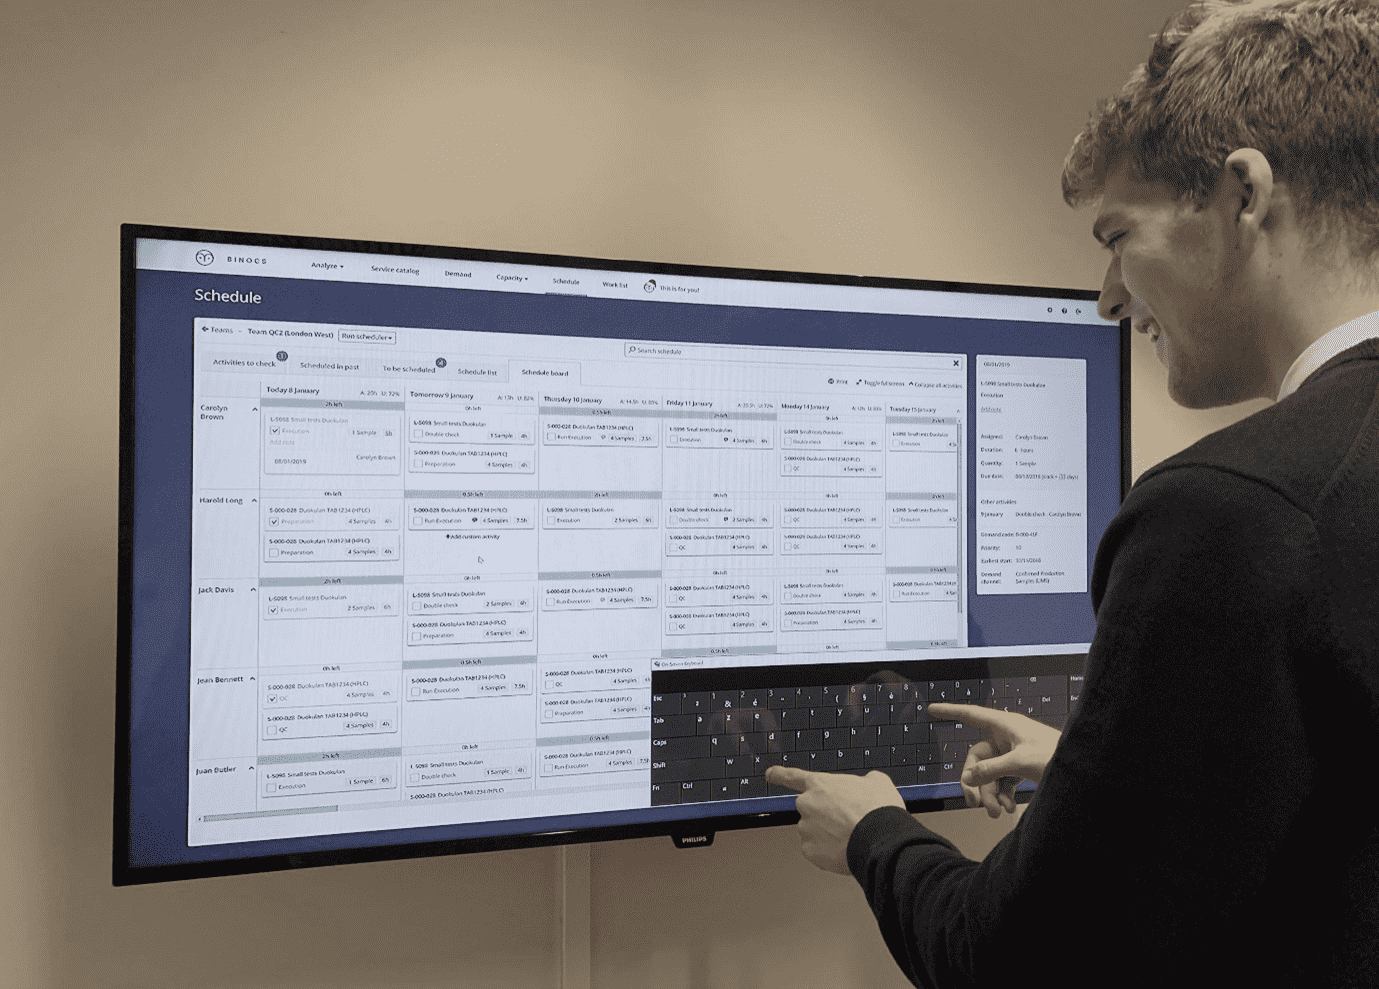 A man interacts with the Binocs schedule board via a large touchscreen display installed in a lab. This is a great example of how digital is changing lean labs